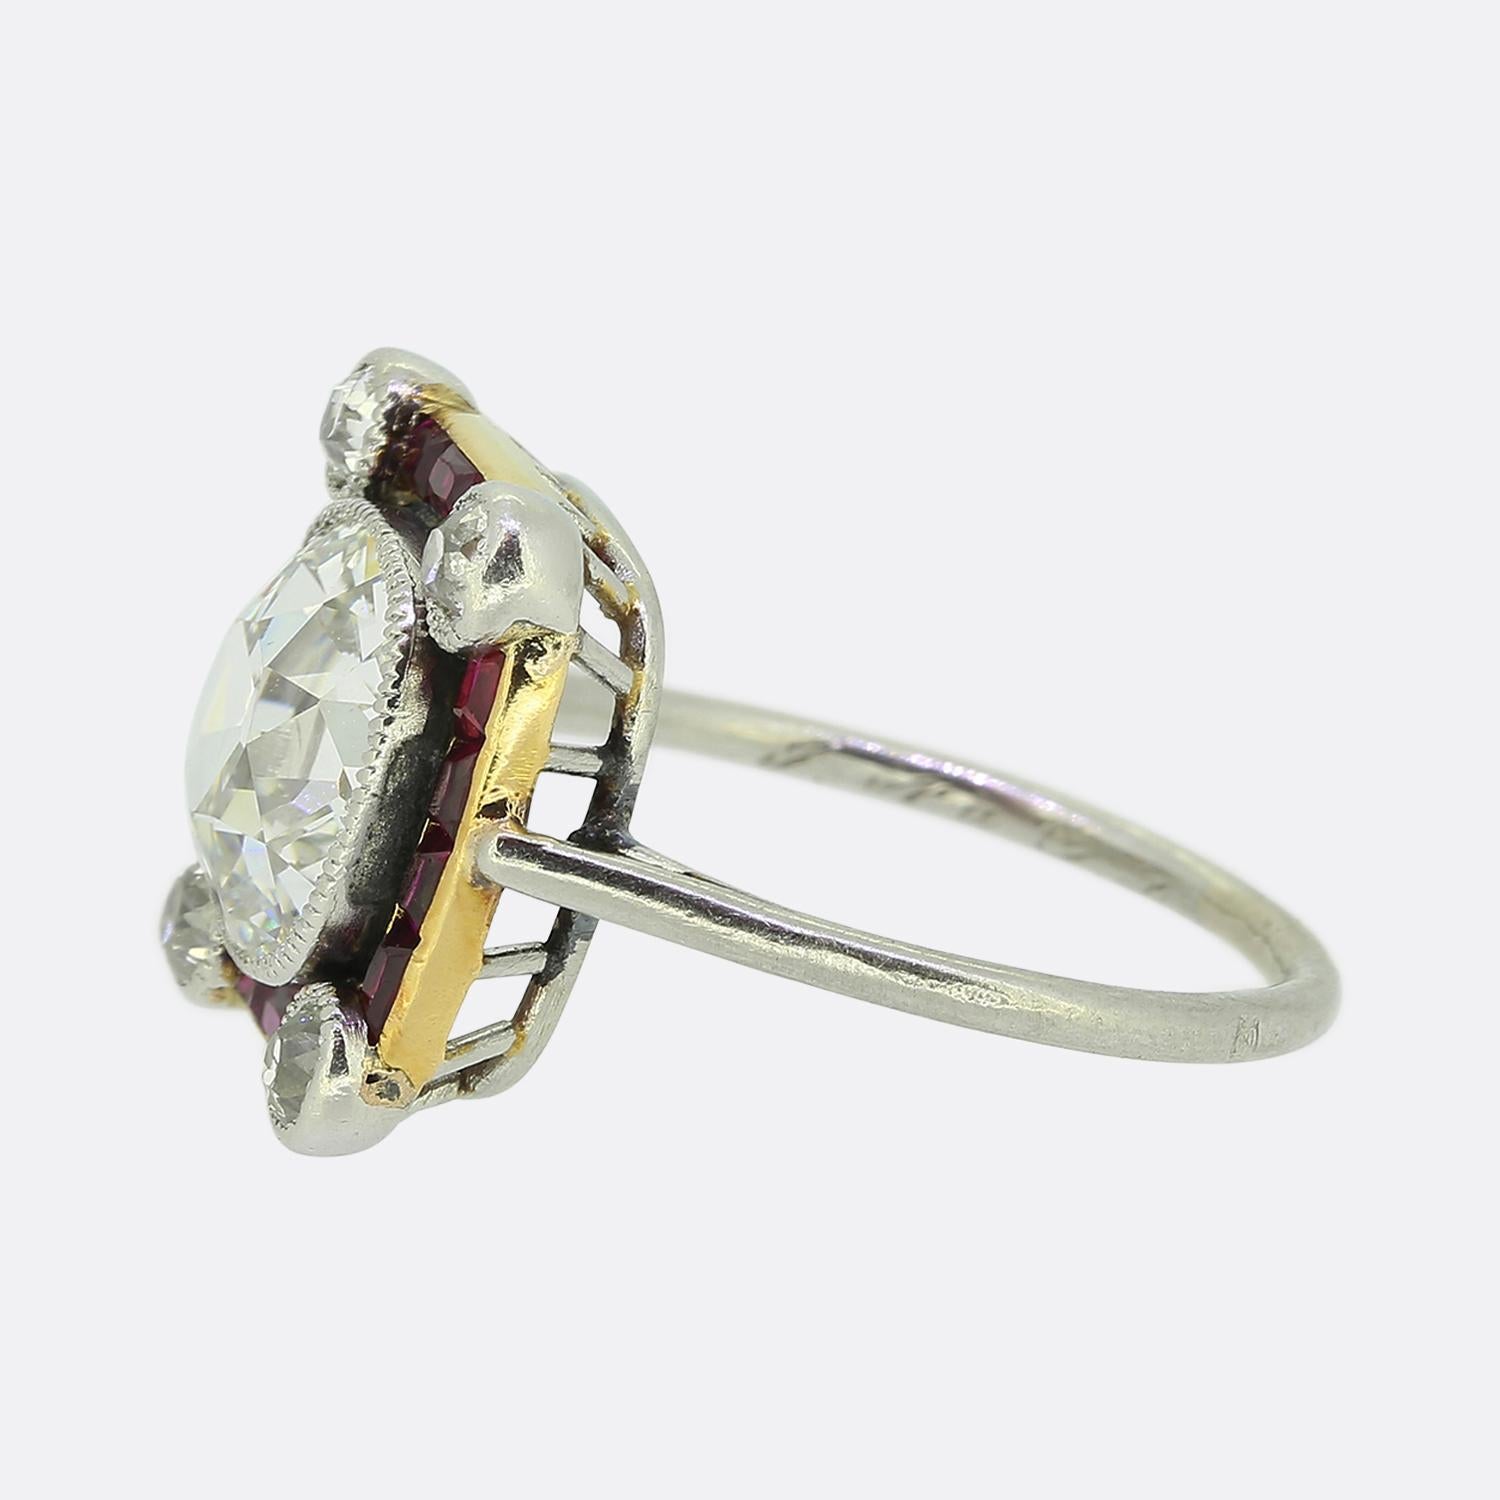 Here we have a truly remarkable cluster ring crafted at a time when Art Deco style was at the height of design. This chic and stylish piece has been crafted from platinum and showcases an outstanding old cushion cut diamond at the centre of the